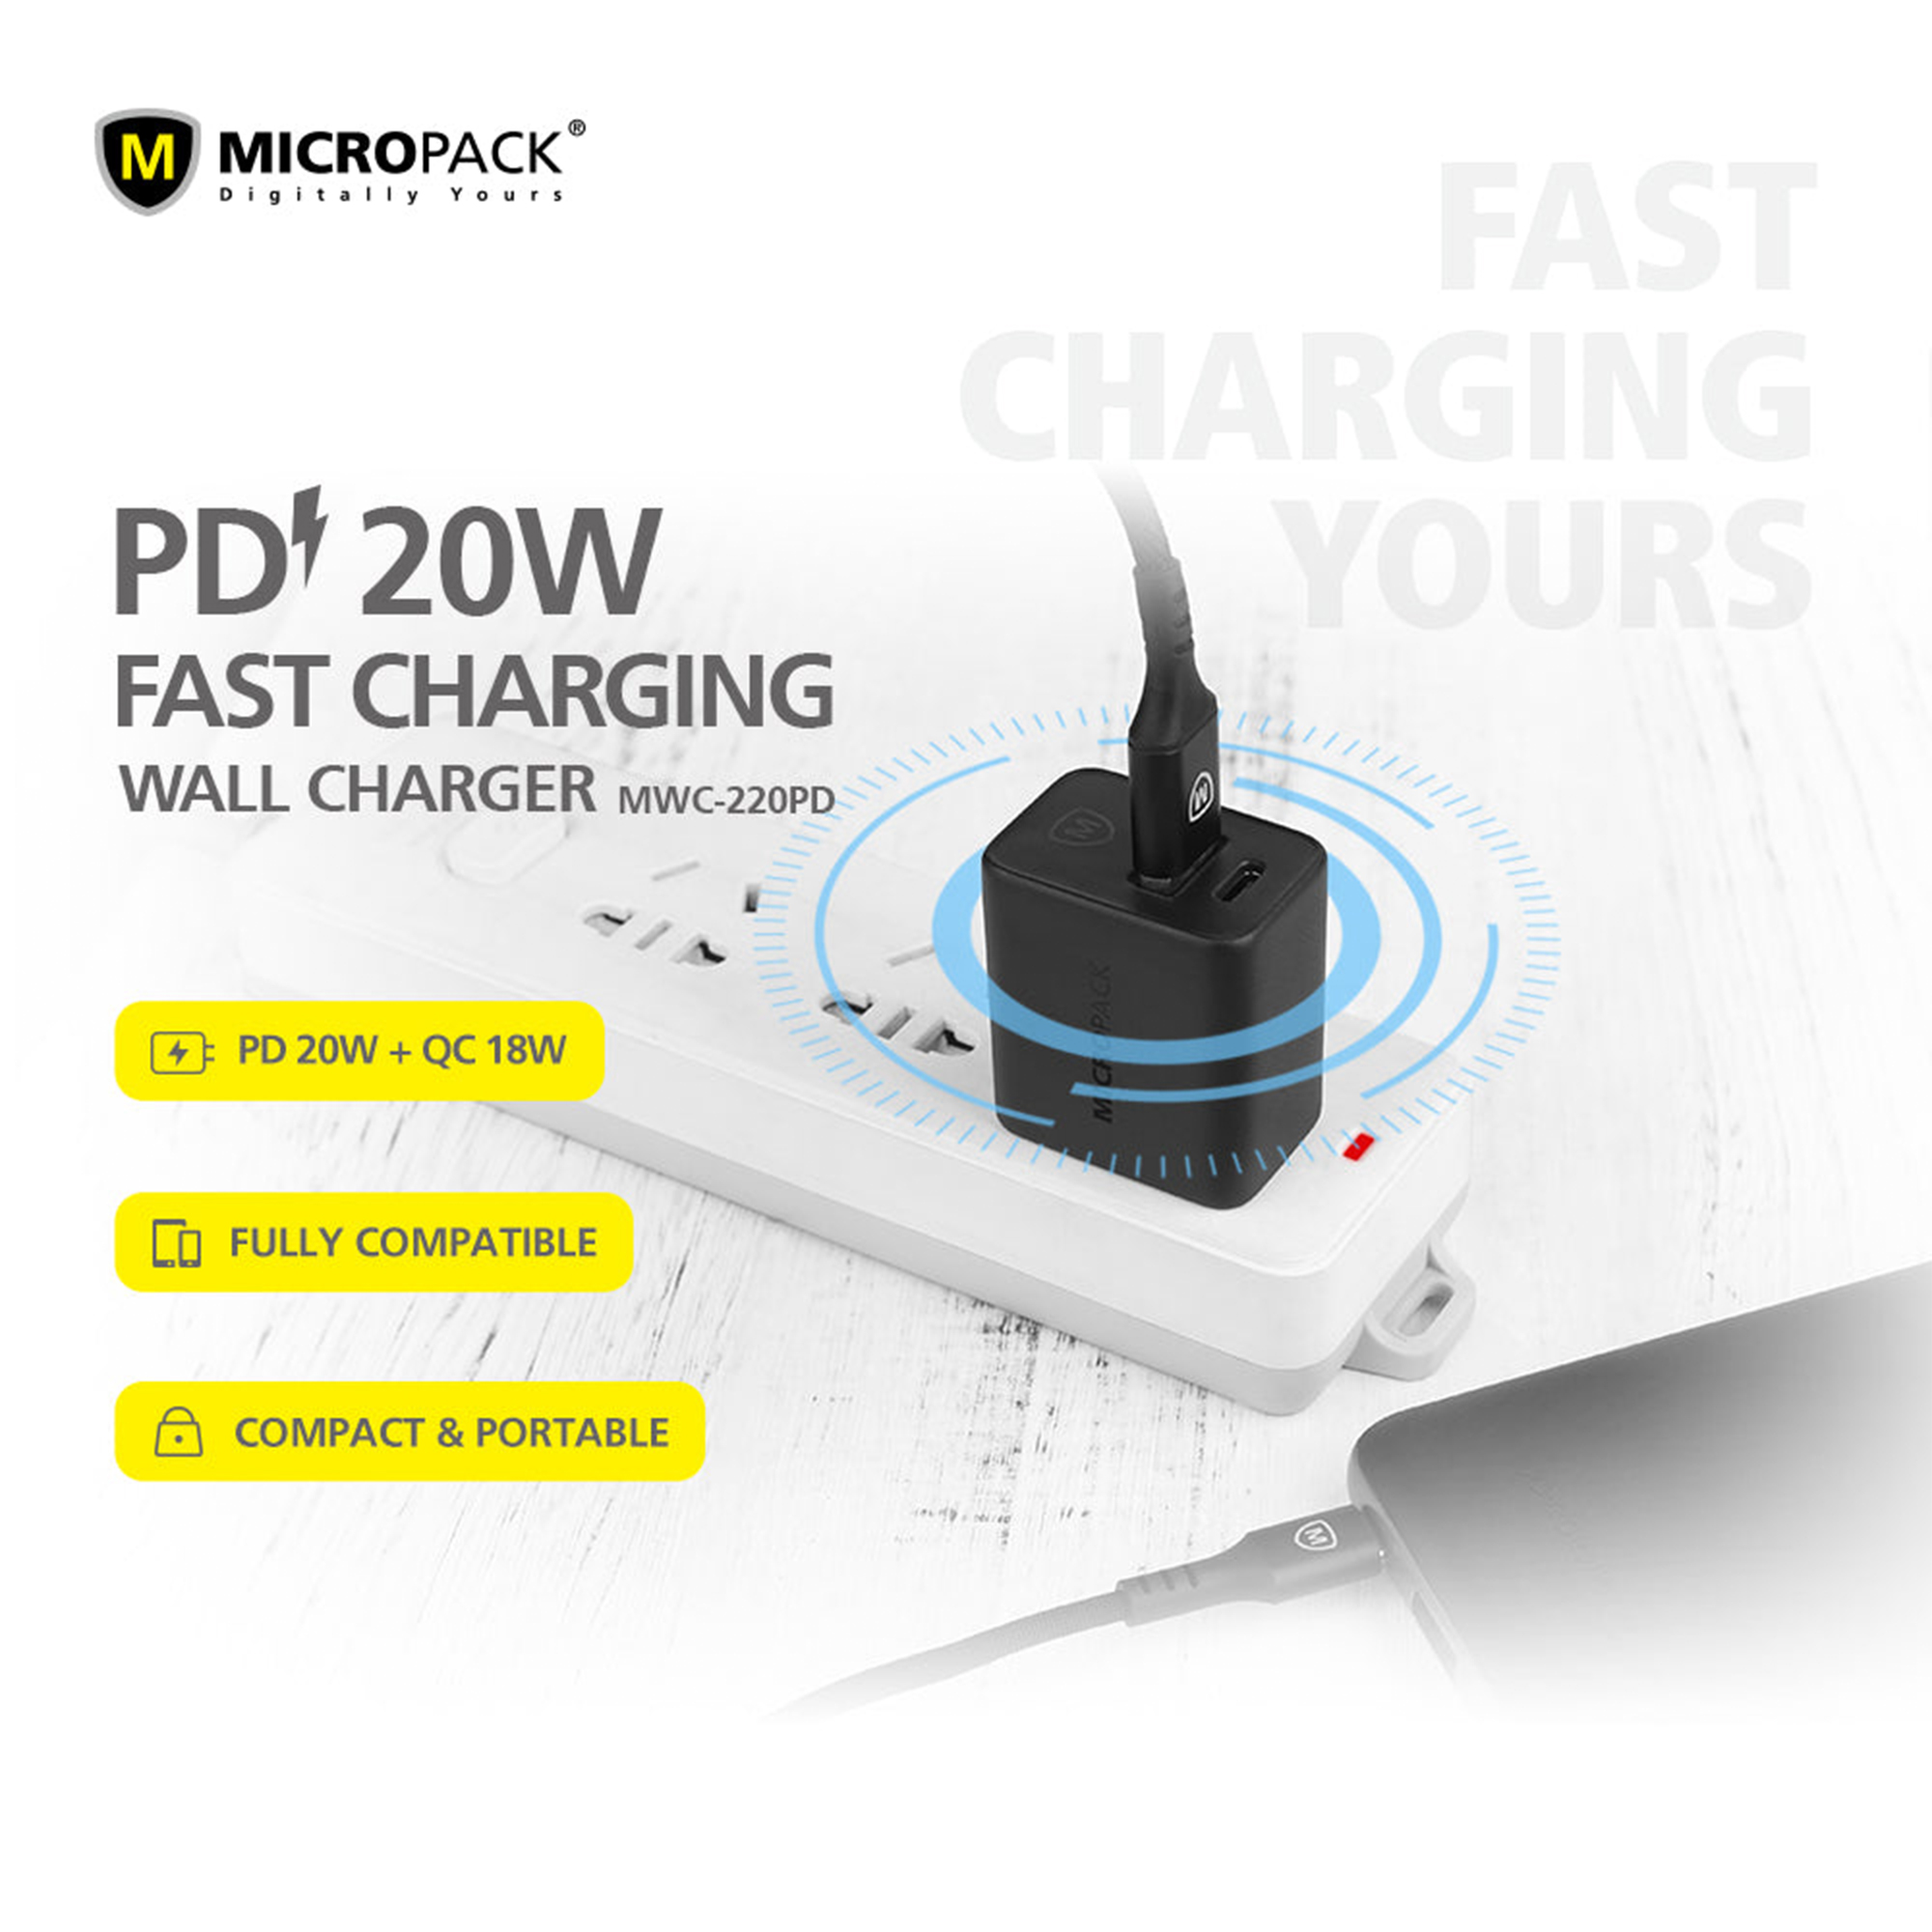 Micropack-20W-Wall-Charger-Fast-Charging-Block-Dual-Ports-PD-MWC-220PD-US-Plug-Black-2